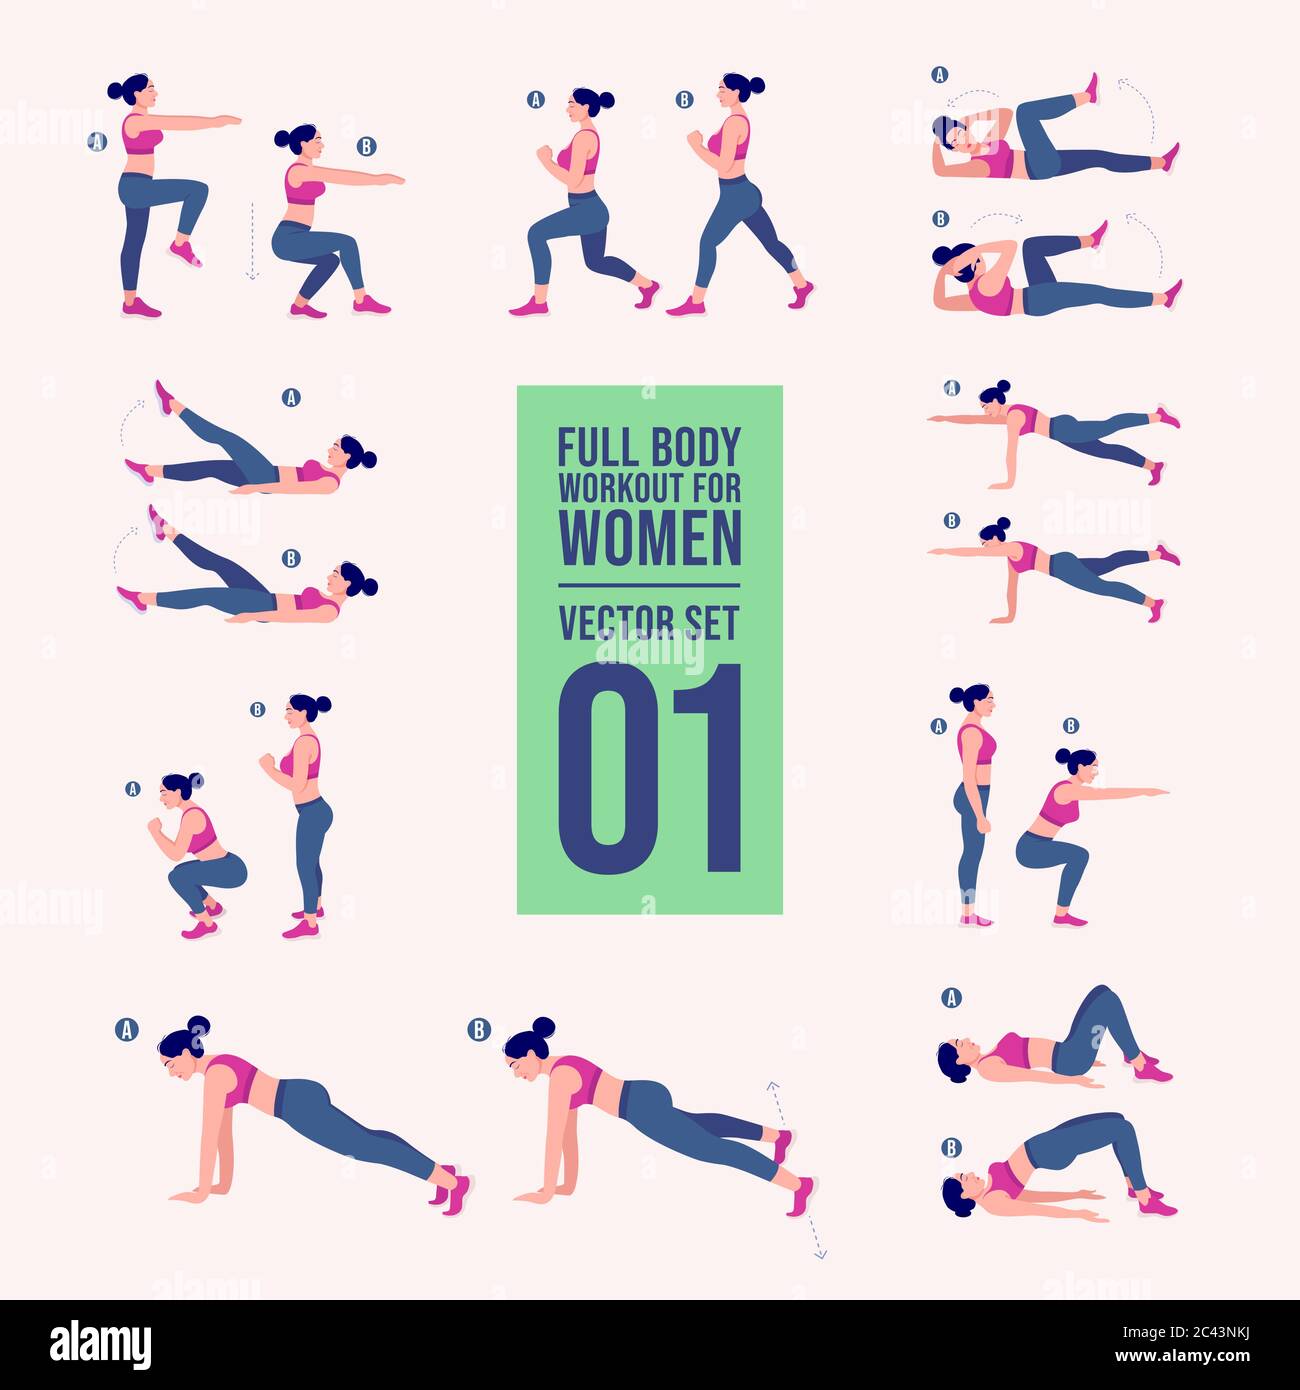 Full body workout set. Exercise for woman. Illustration about life